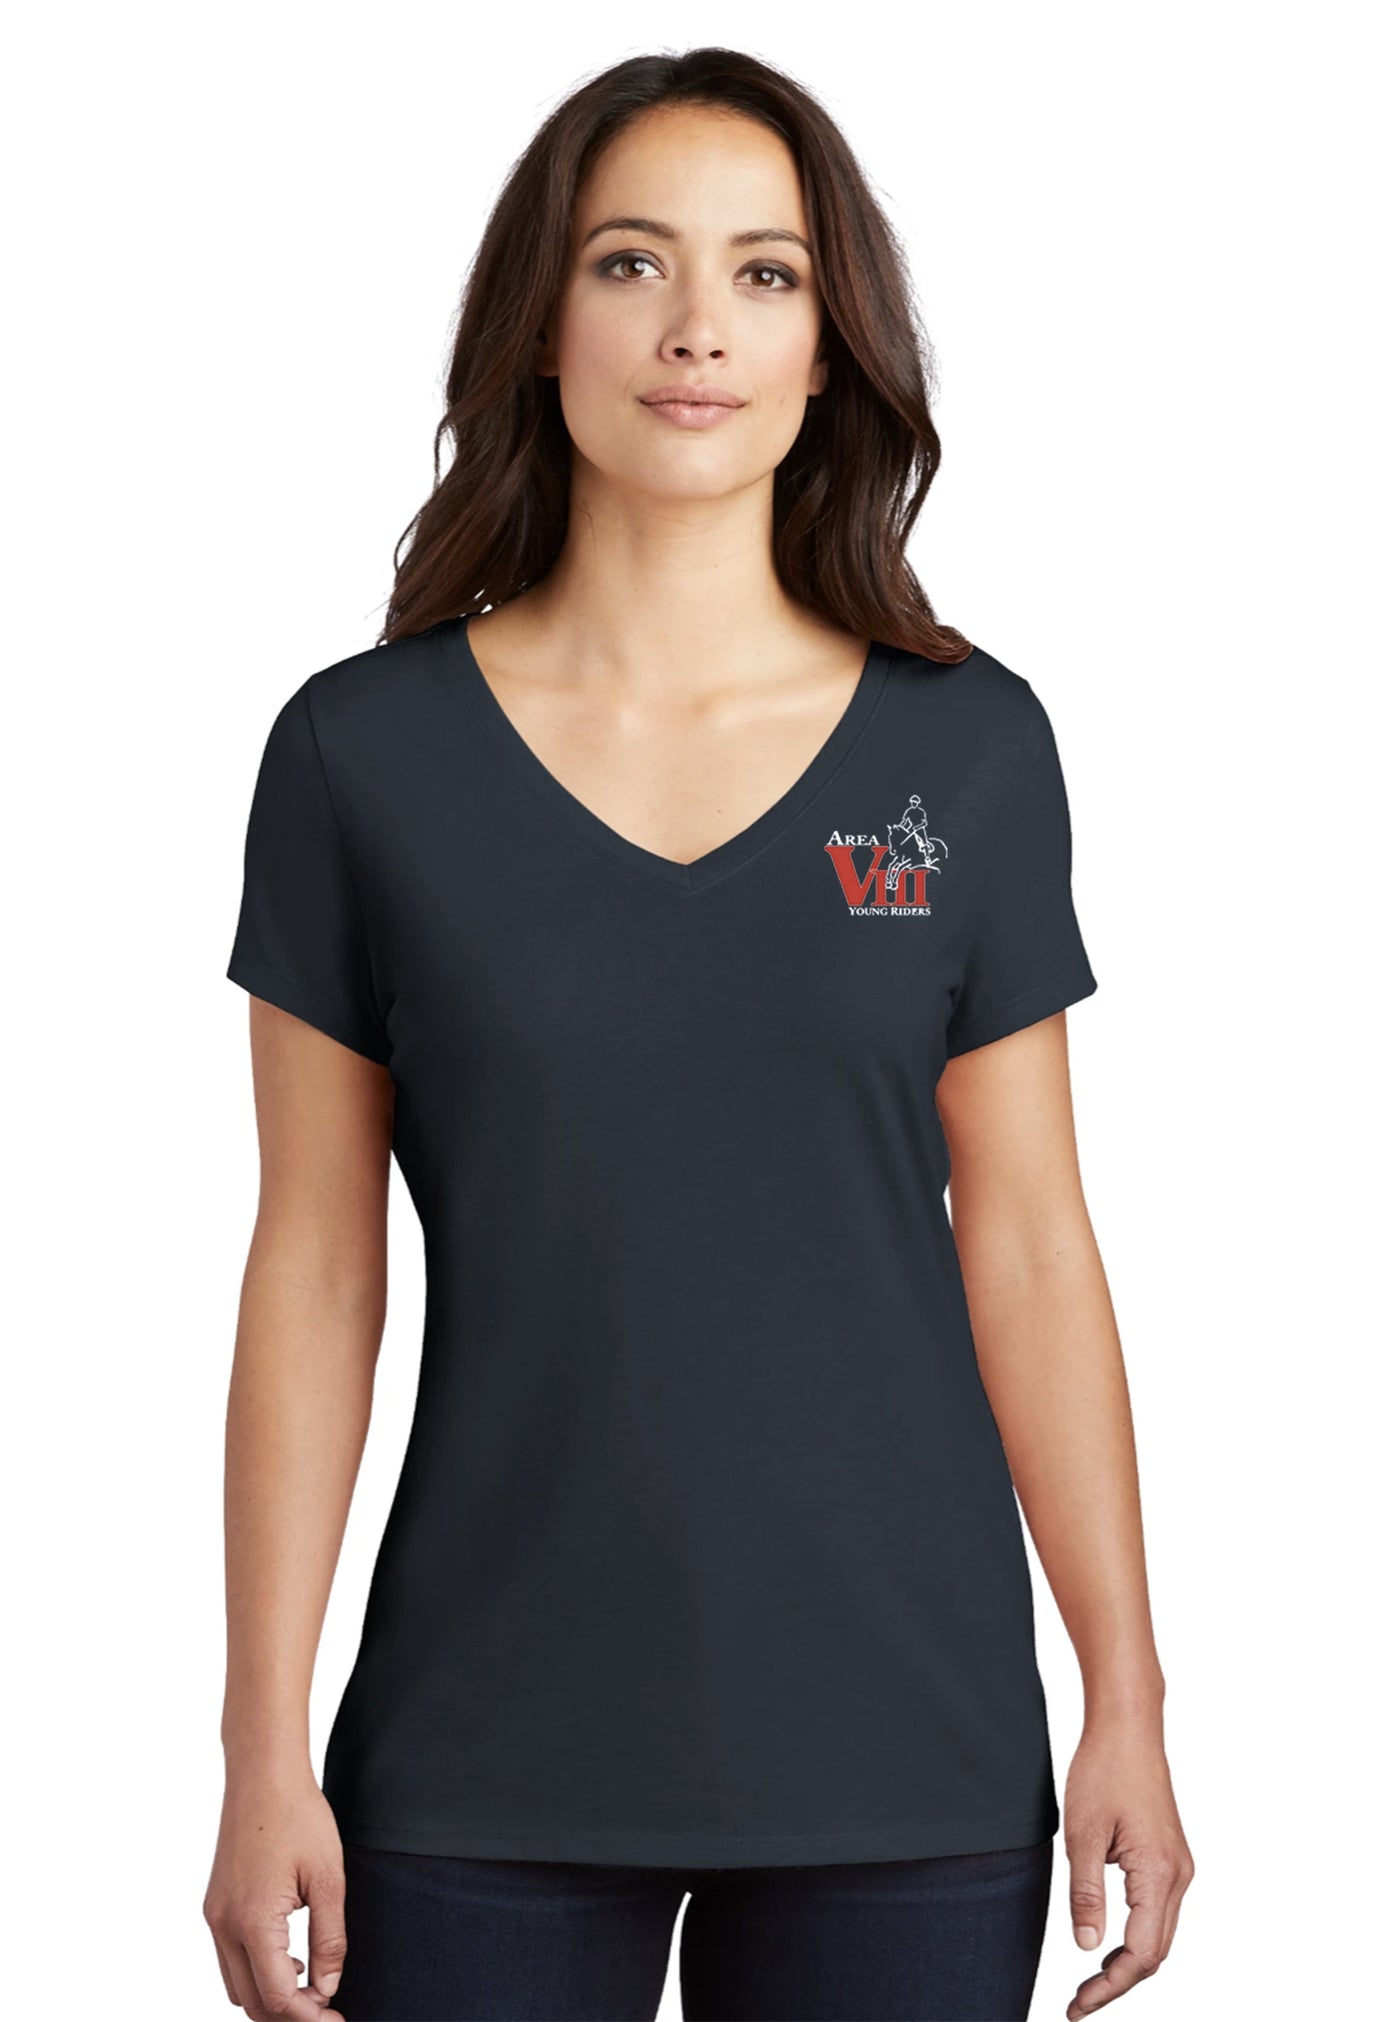 Area 8 Young Riders District ® Women’s Perfect Tri ® V-Neck Tee - Navy or Red